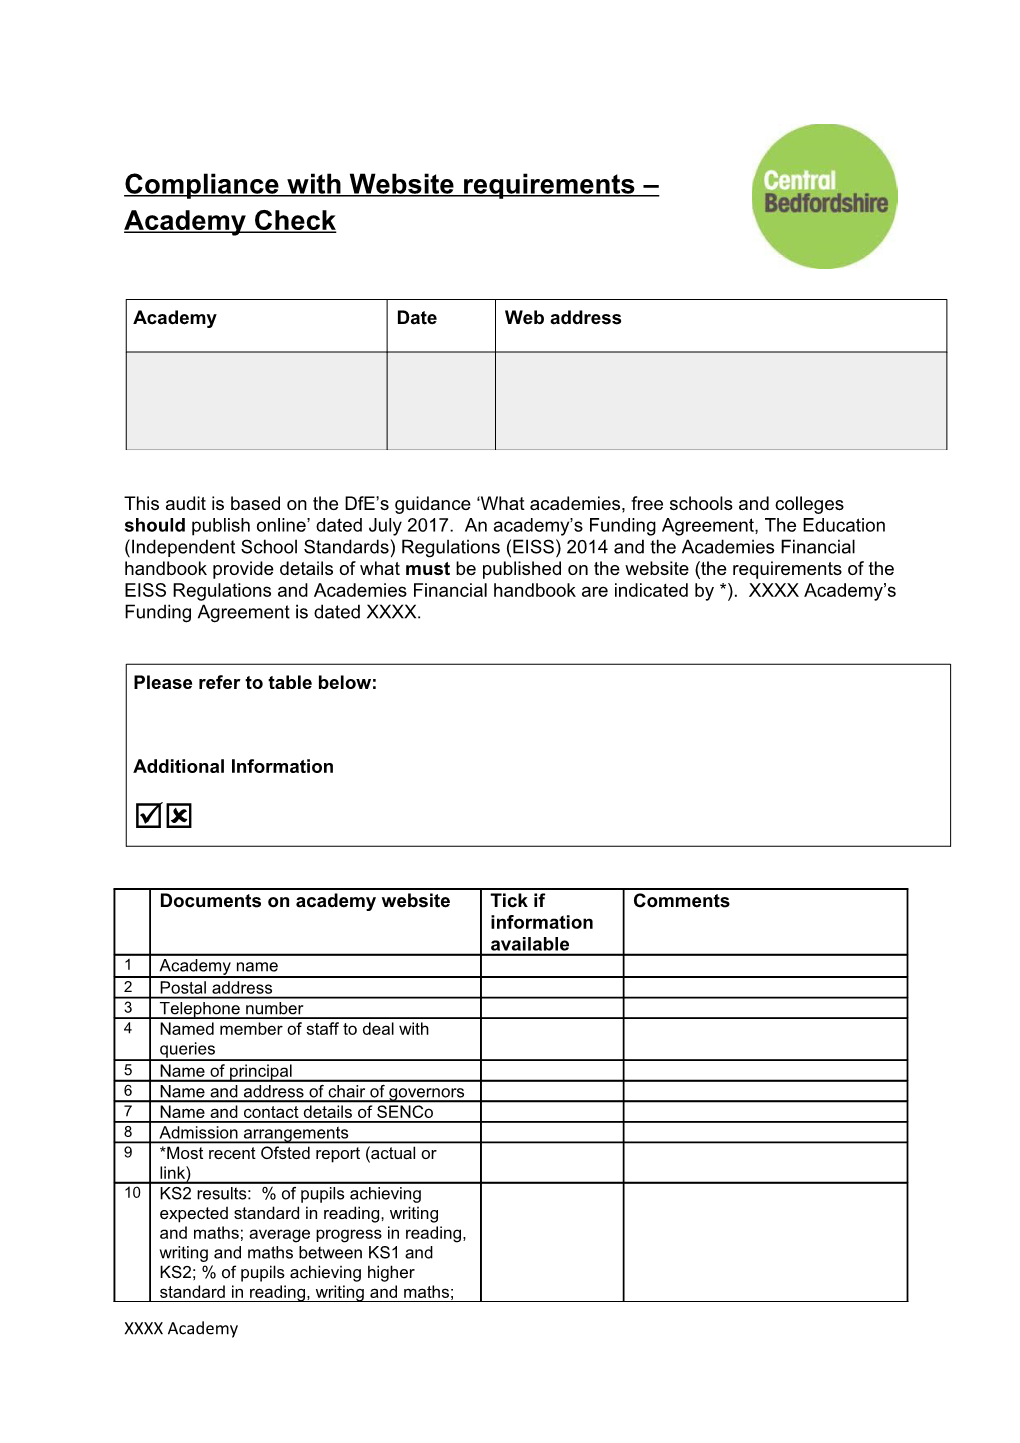 Compliance with Website Requirements Academy Check